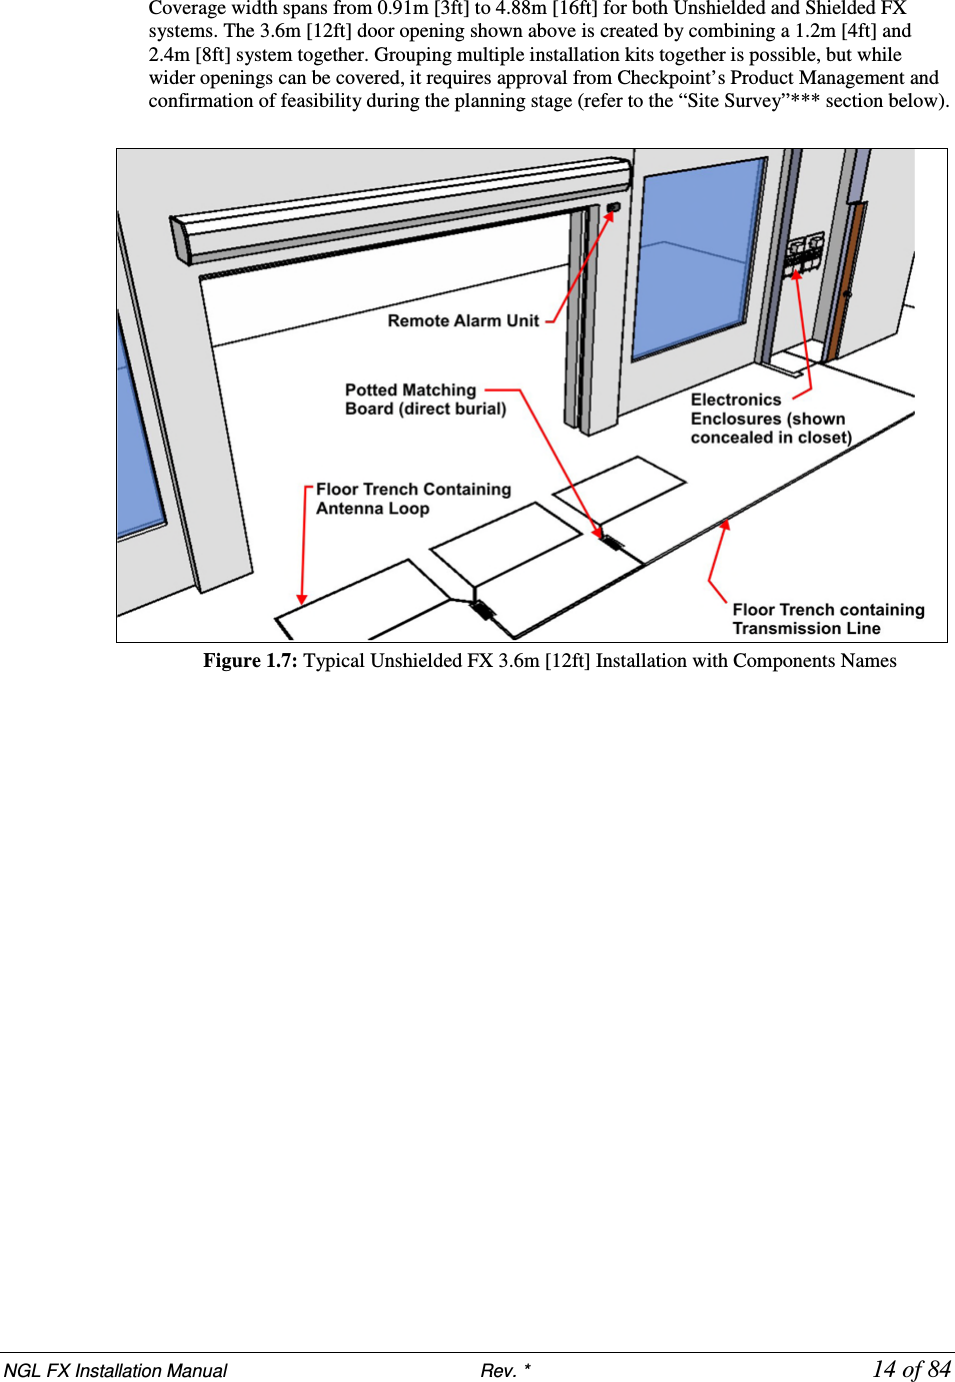 NGL FX Installation Manual                           Rev. *            14 of 84 Coverage width spans from 0.91m [3ft] to 4.88m [16ft] for both Unshielded and Shielded FX systems. The 3.6m [12ft] door opening shown above is created by combining a 1.2m [4ft] and 2.4m [8ft] system together. Grouping multiple installation kits together is possible, but while wider openings can be covered, it requires approval from Checkpoint’s Product Management and confirmation of feasibility during the planning stage (refer to the “Site Survey”*** section below).     Figure 1.7: Typical Unshielded FX 3.6m [12ft] Installation with Components Names 